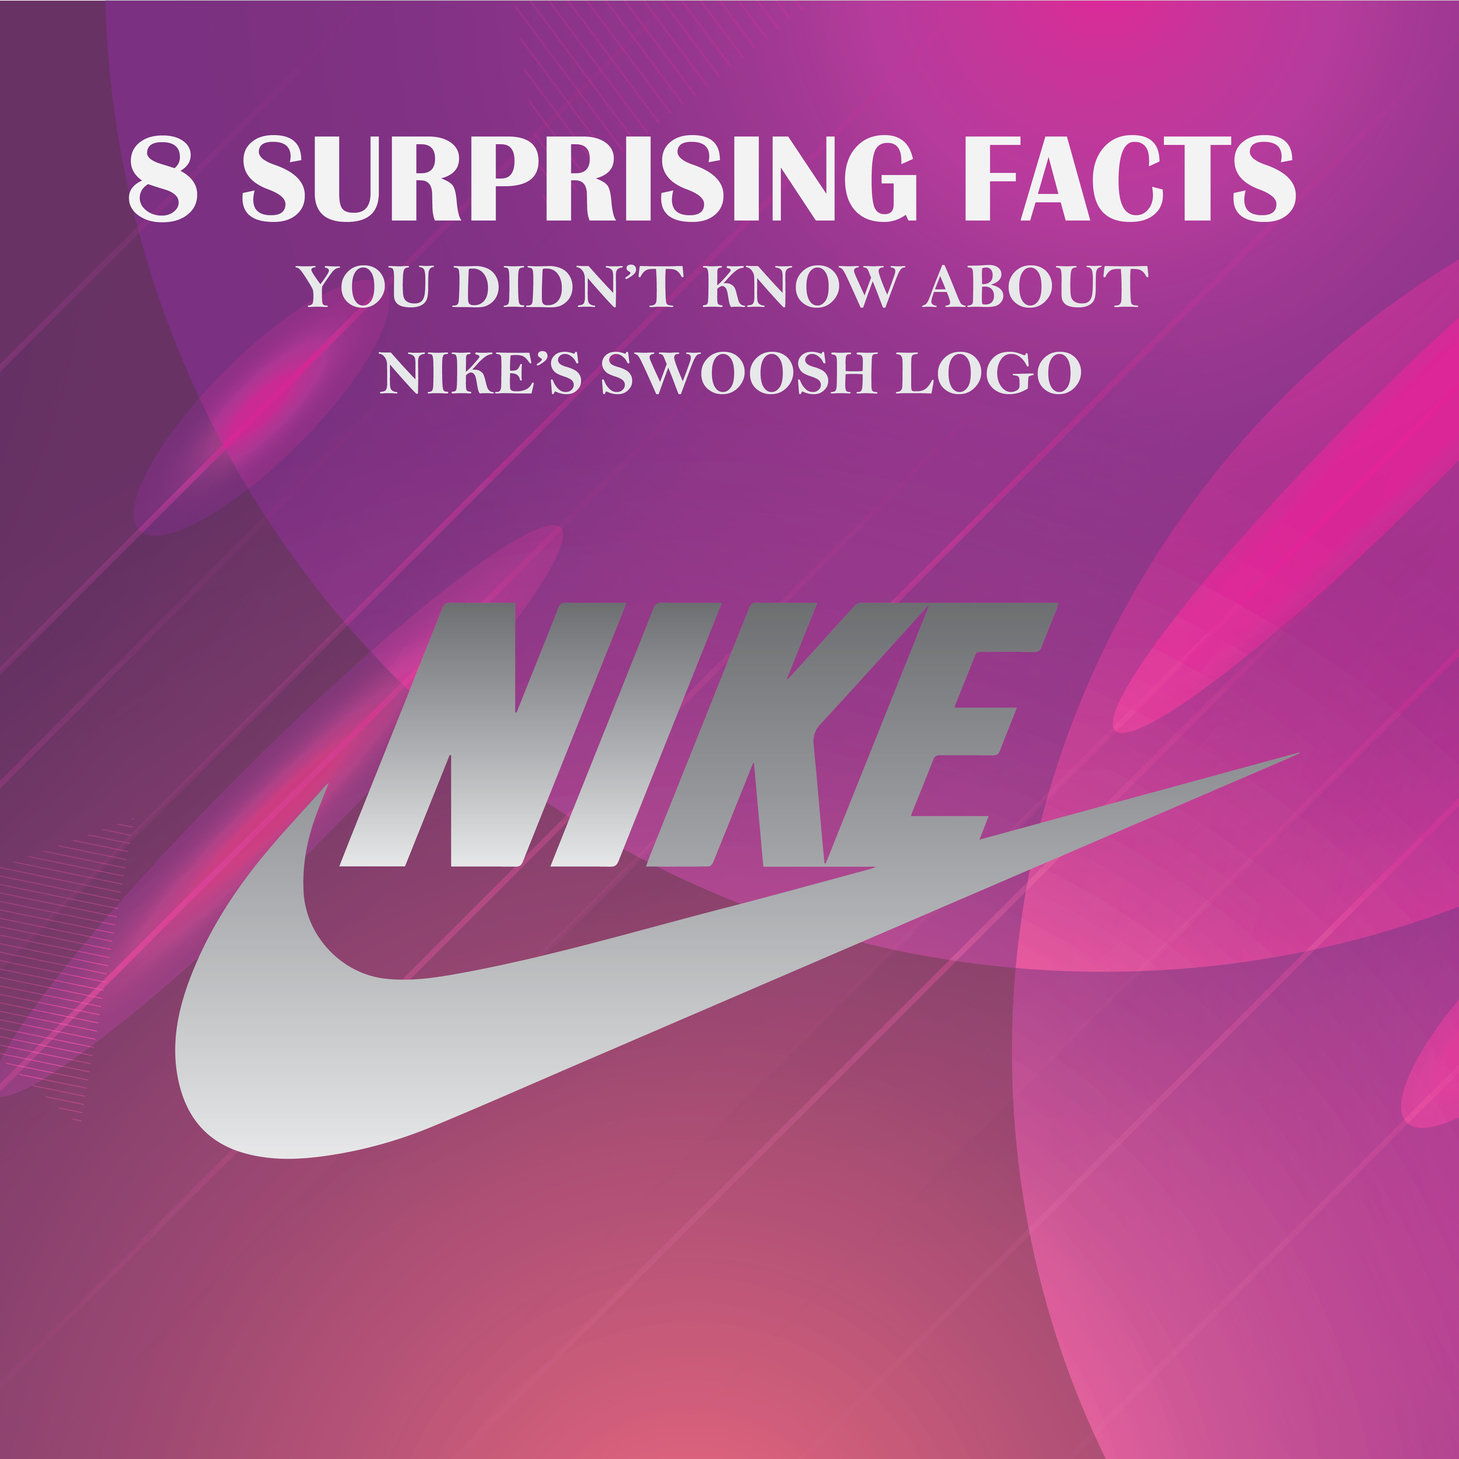 8 Surprising Facts You Didn’t Know About Nike’s Swoosh Logo